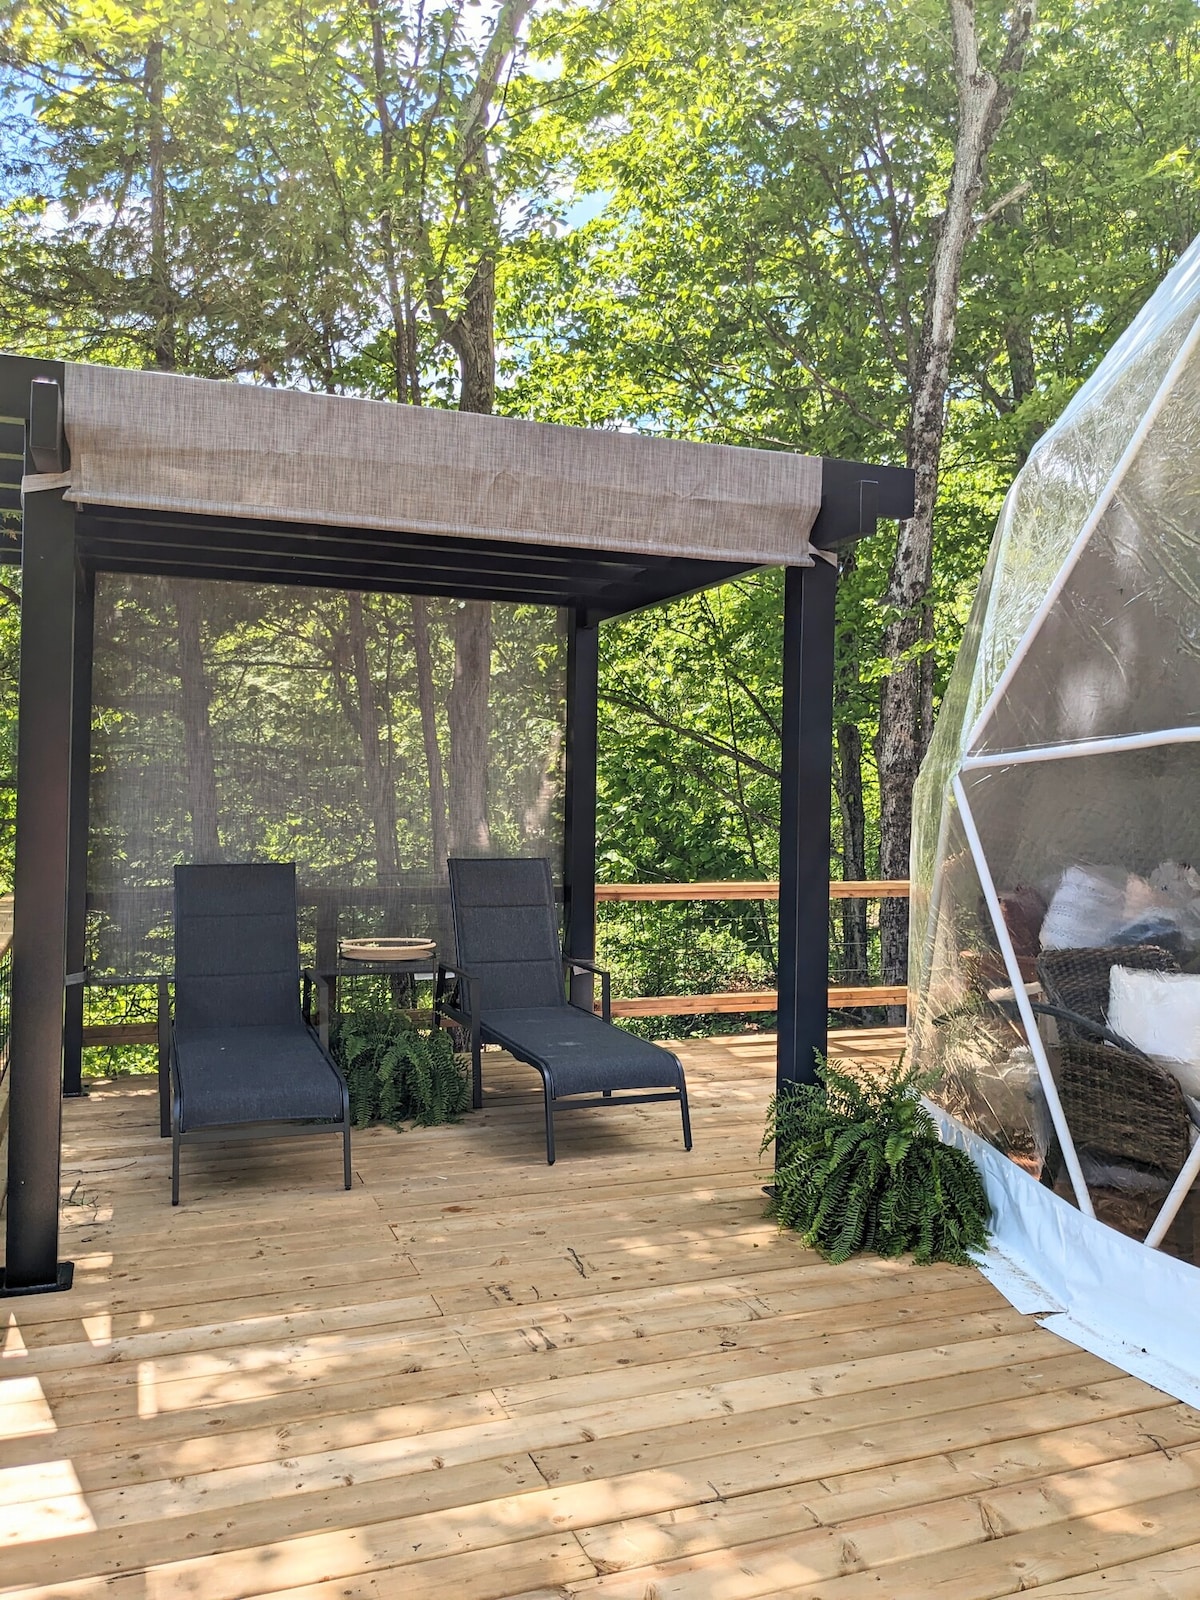 Watercliff Dome | Outdoor Shower | Kayaking | View